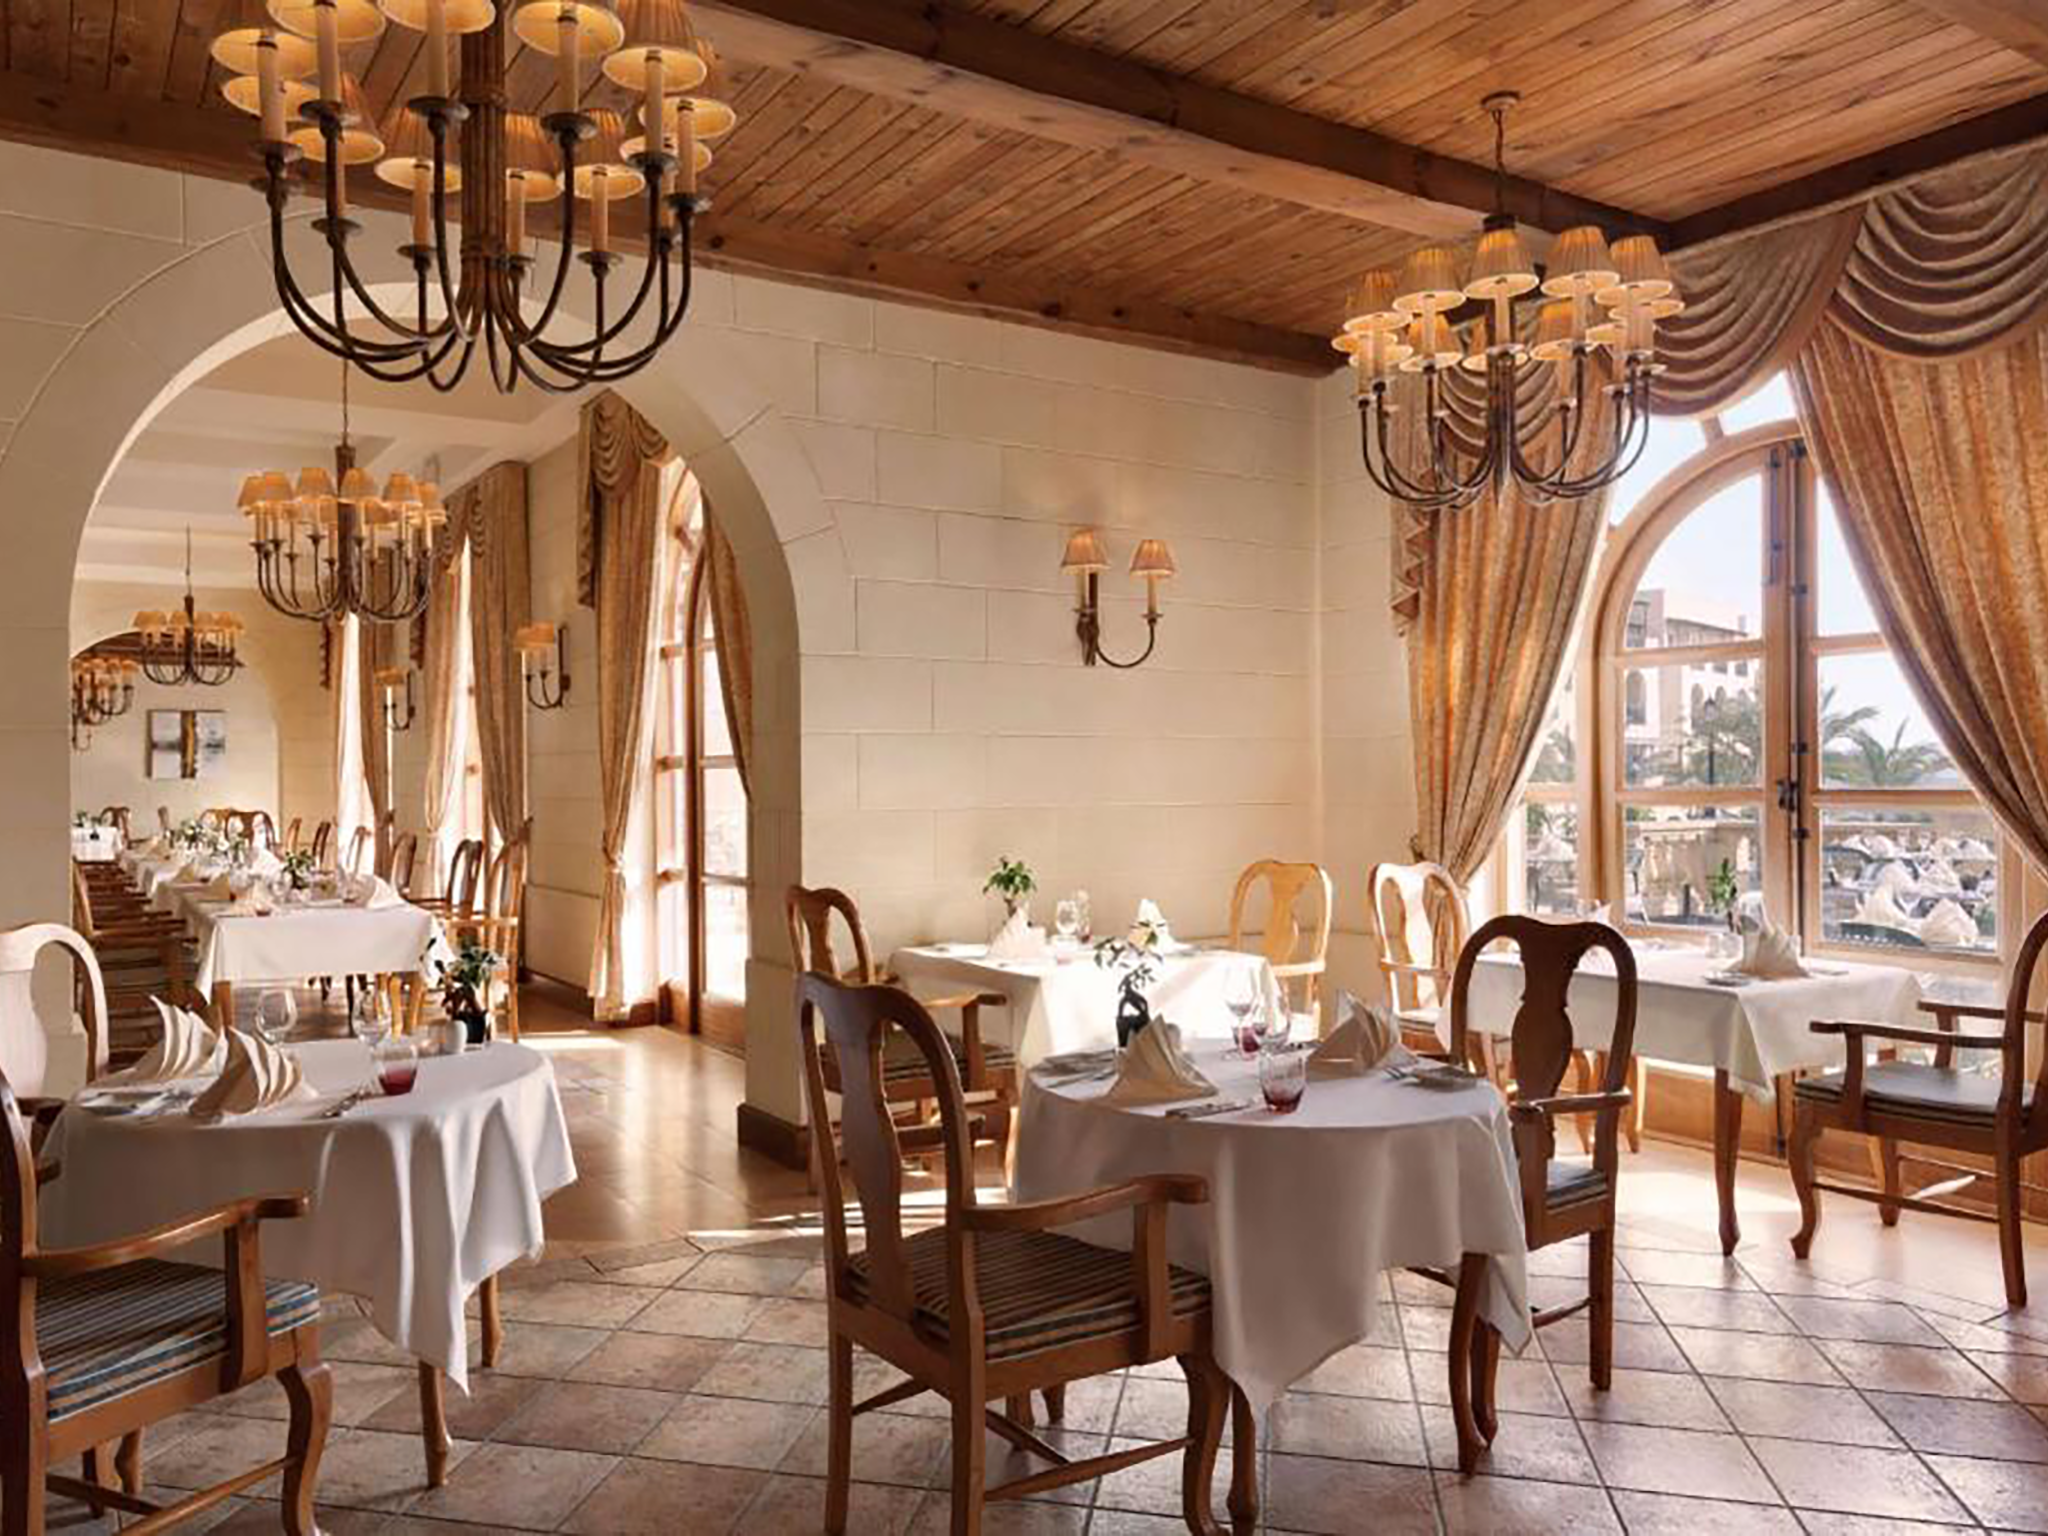 Tucked away in idyllic countryside surroundings, the Kempinski Hotel is the perfect hideaway